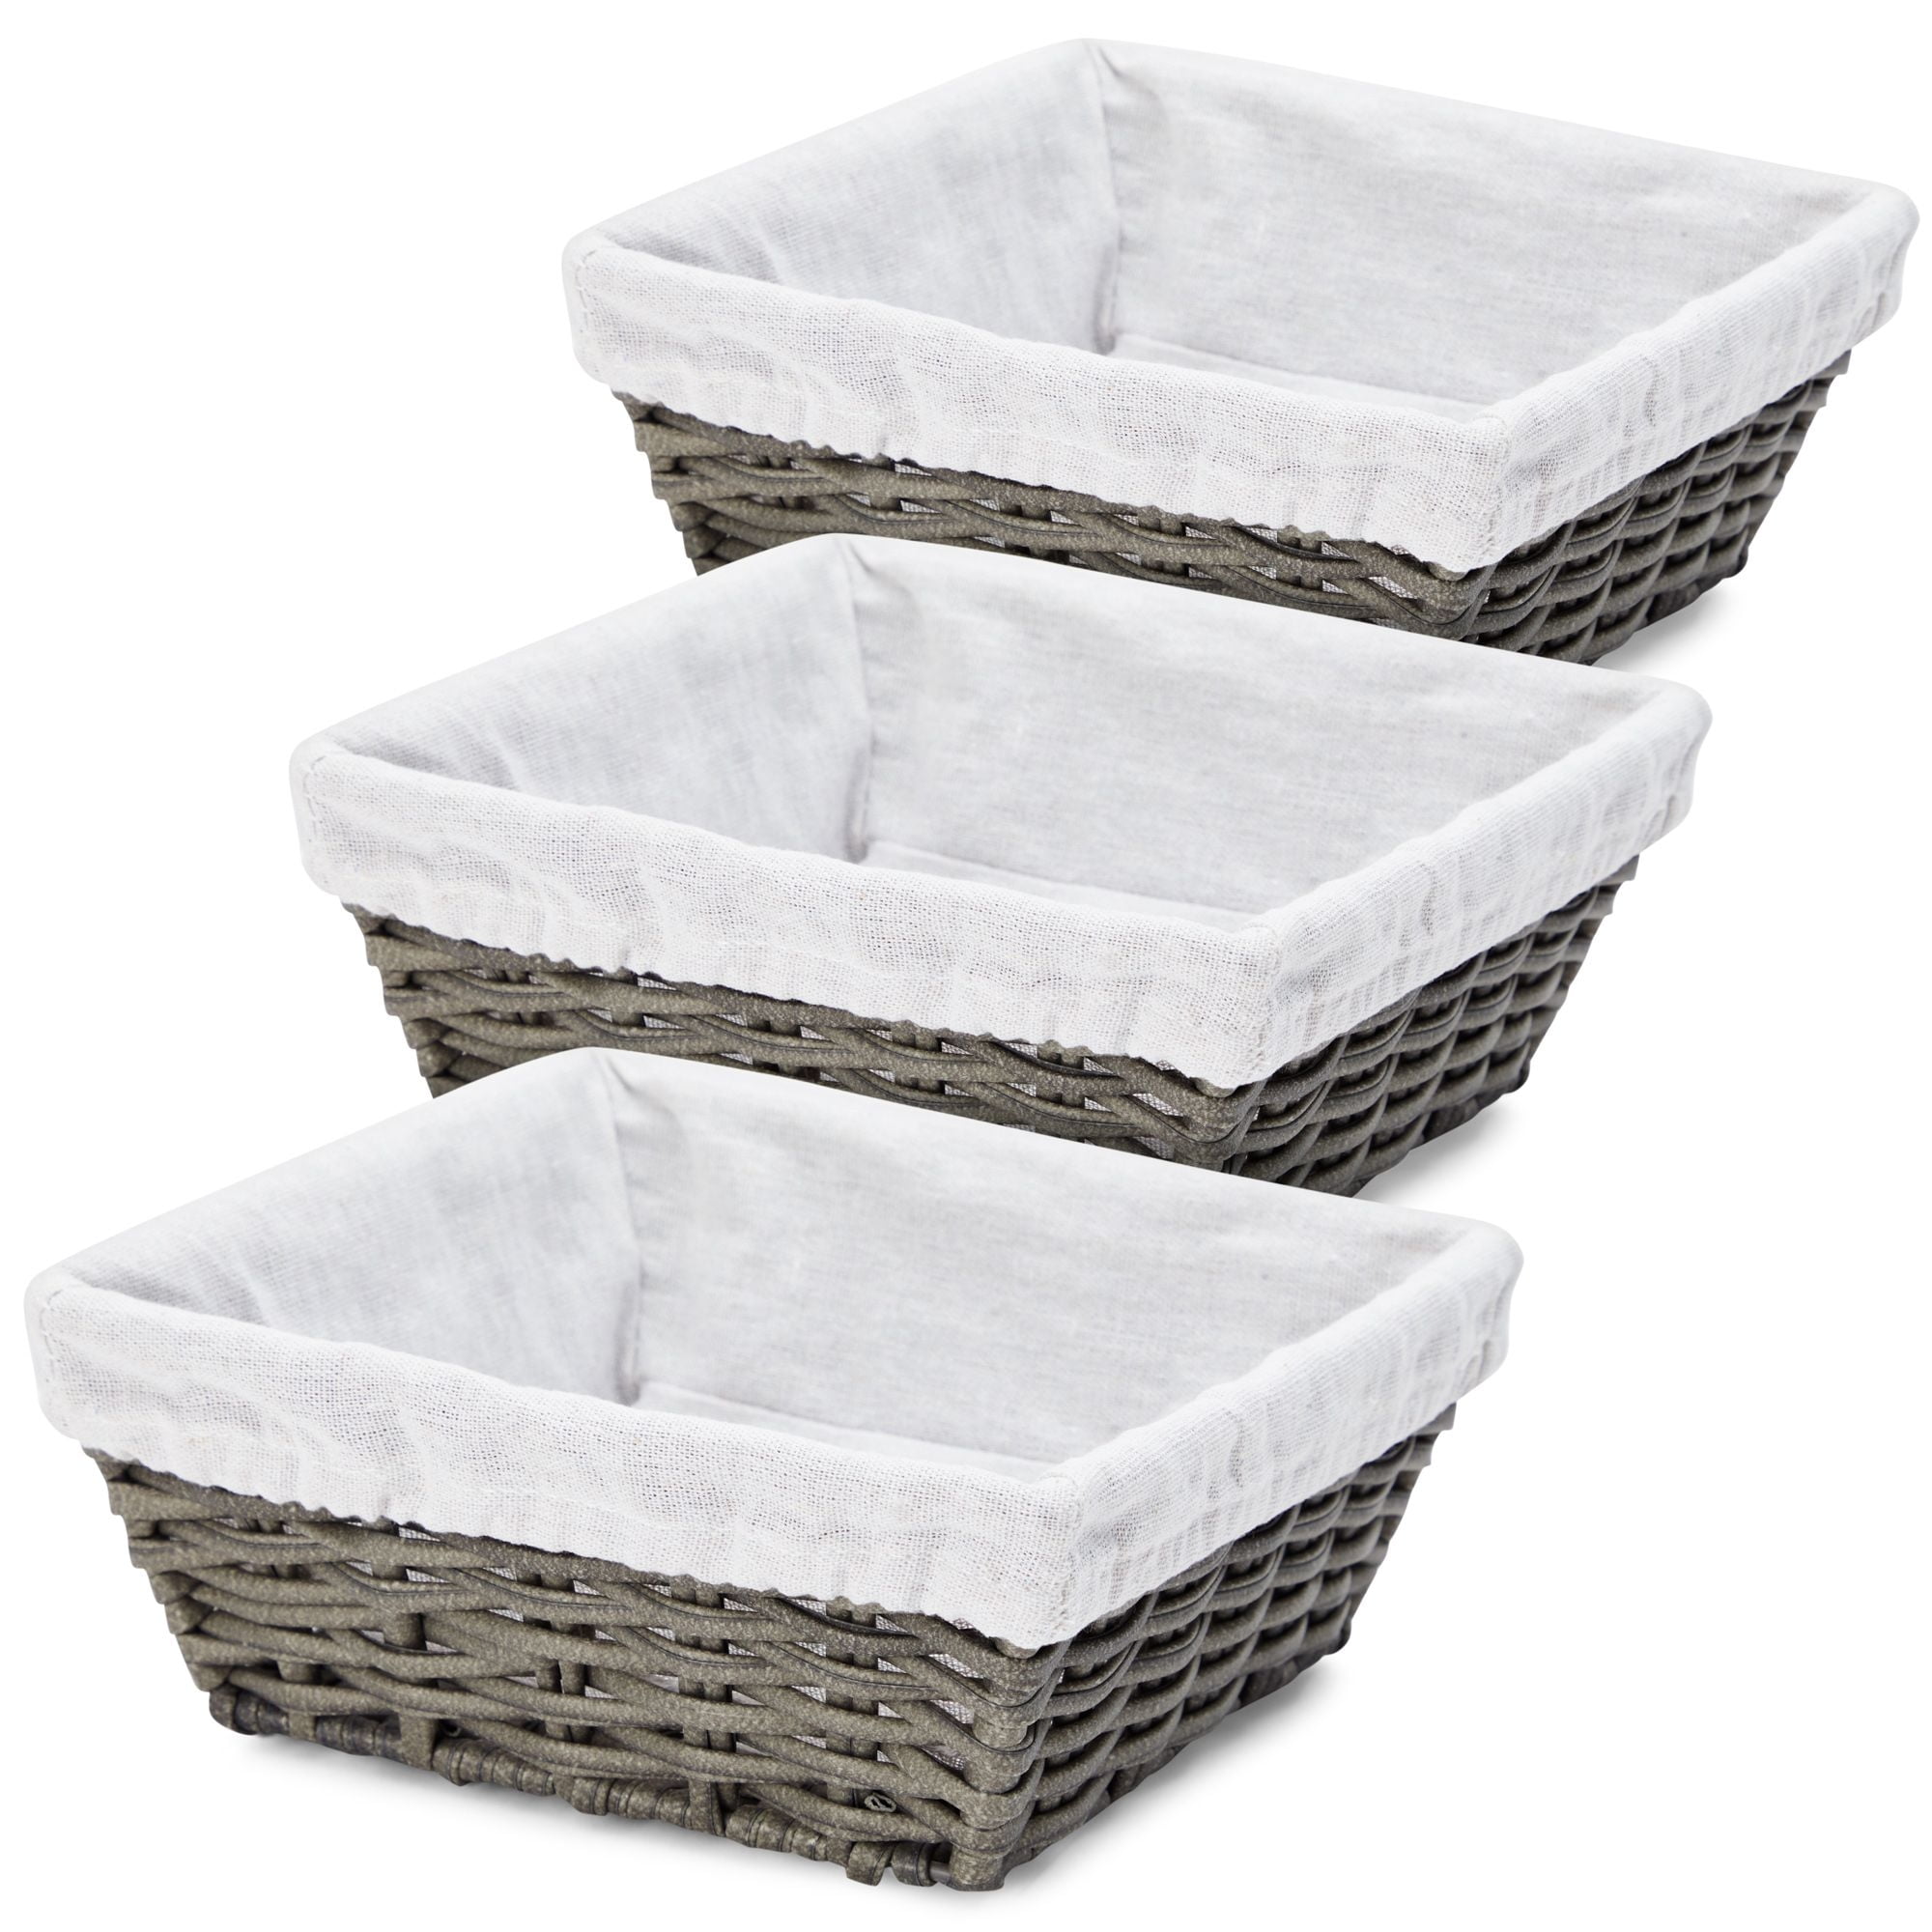 12 Pack Plastic Storage Baskets, Small Baskets for Organizing, Plastic  Storage Bins Wicker Pantry Organizer Bins Household Toys for Laundry Room